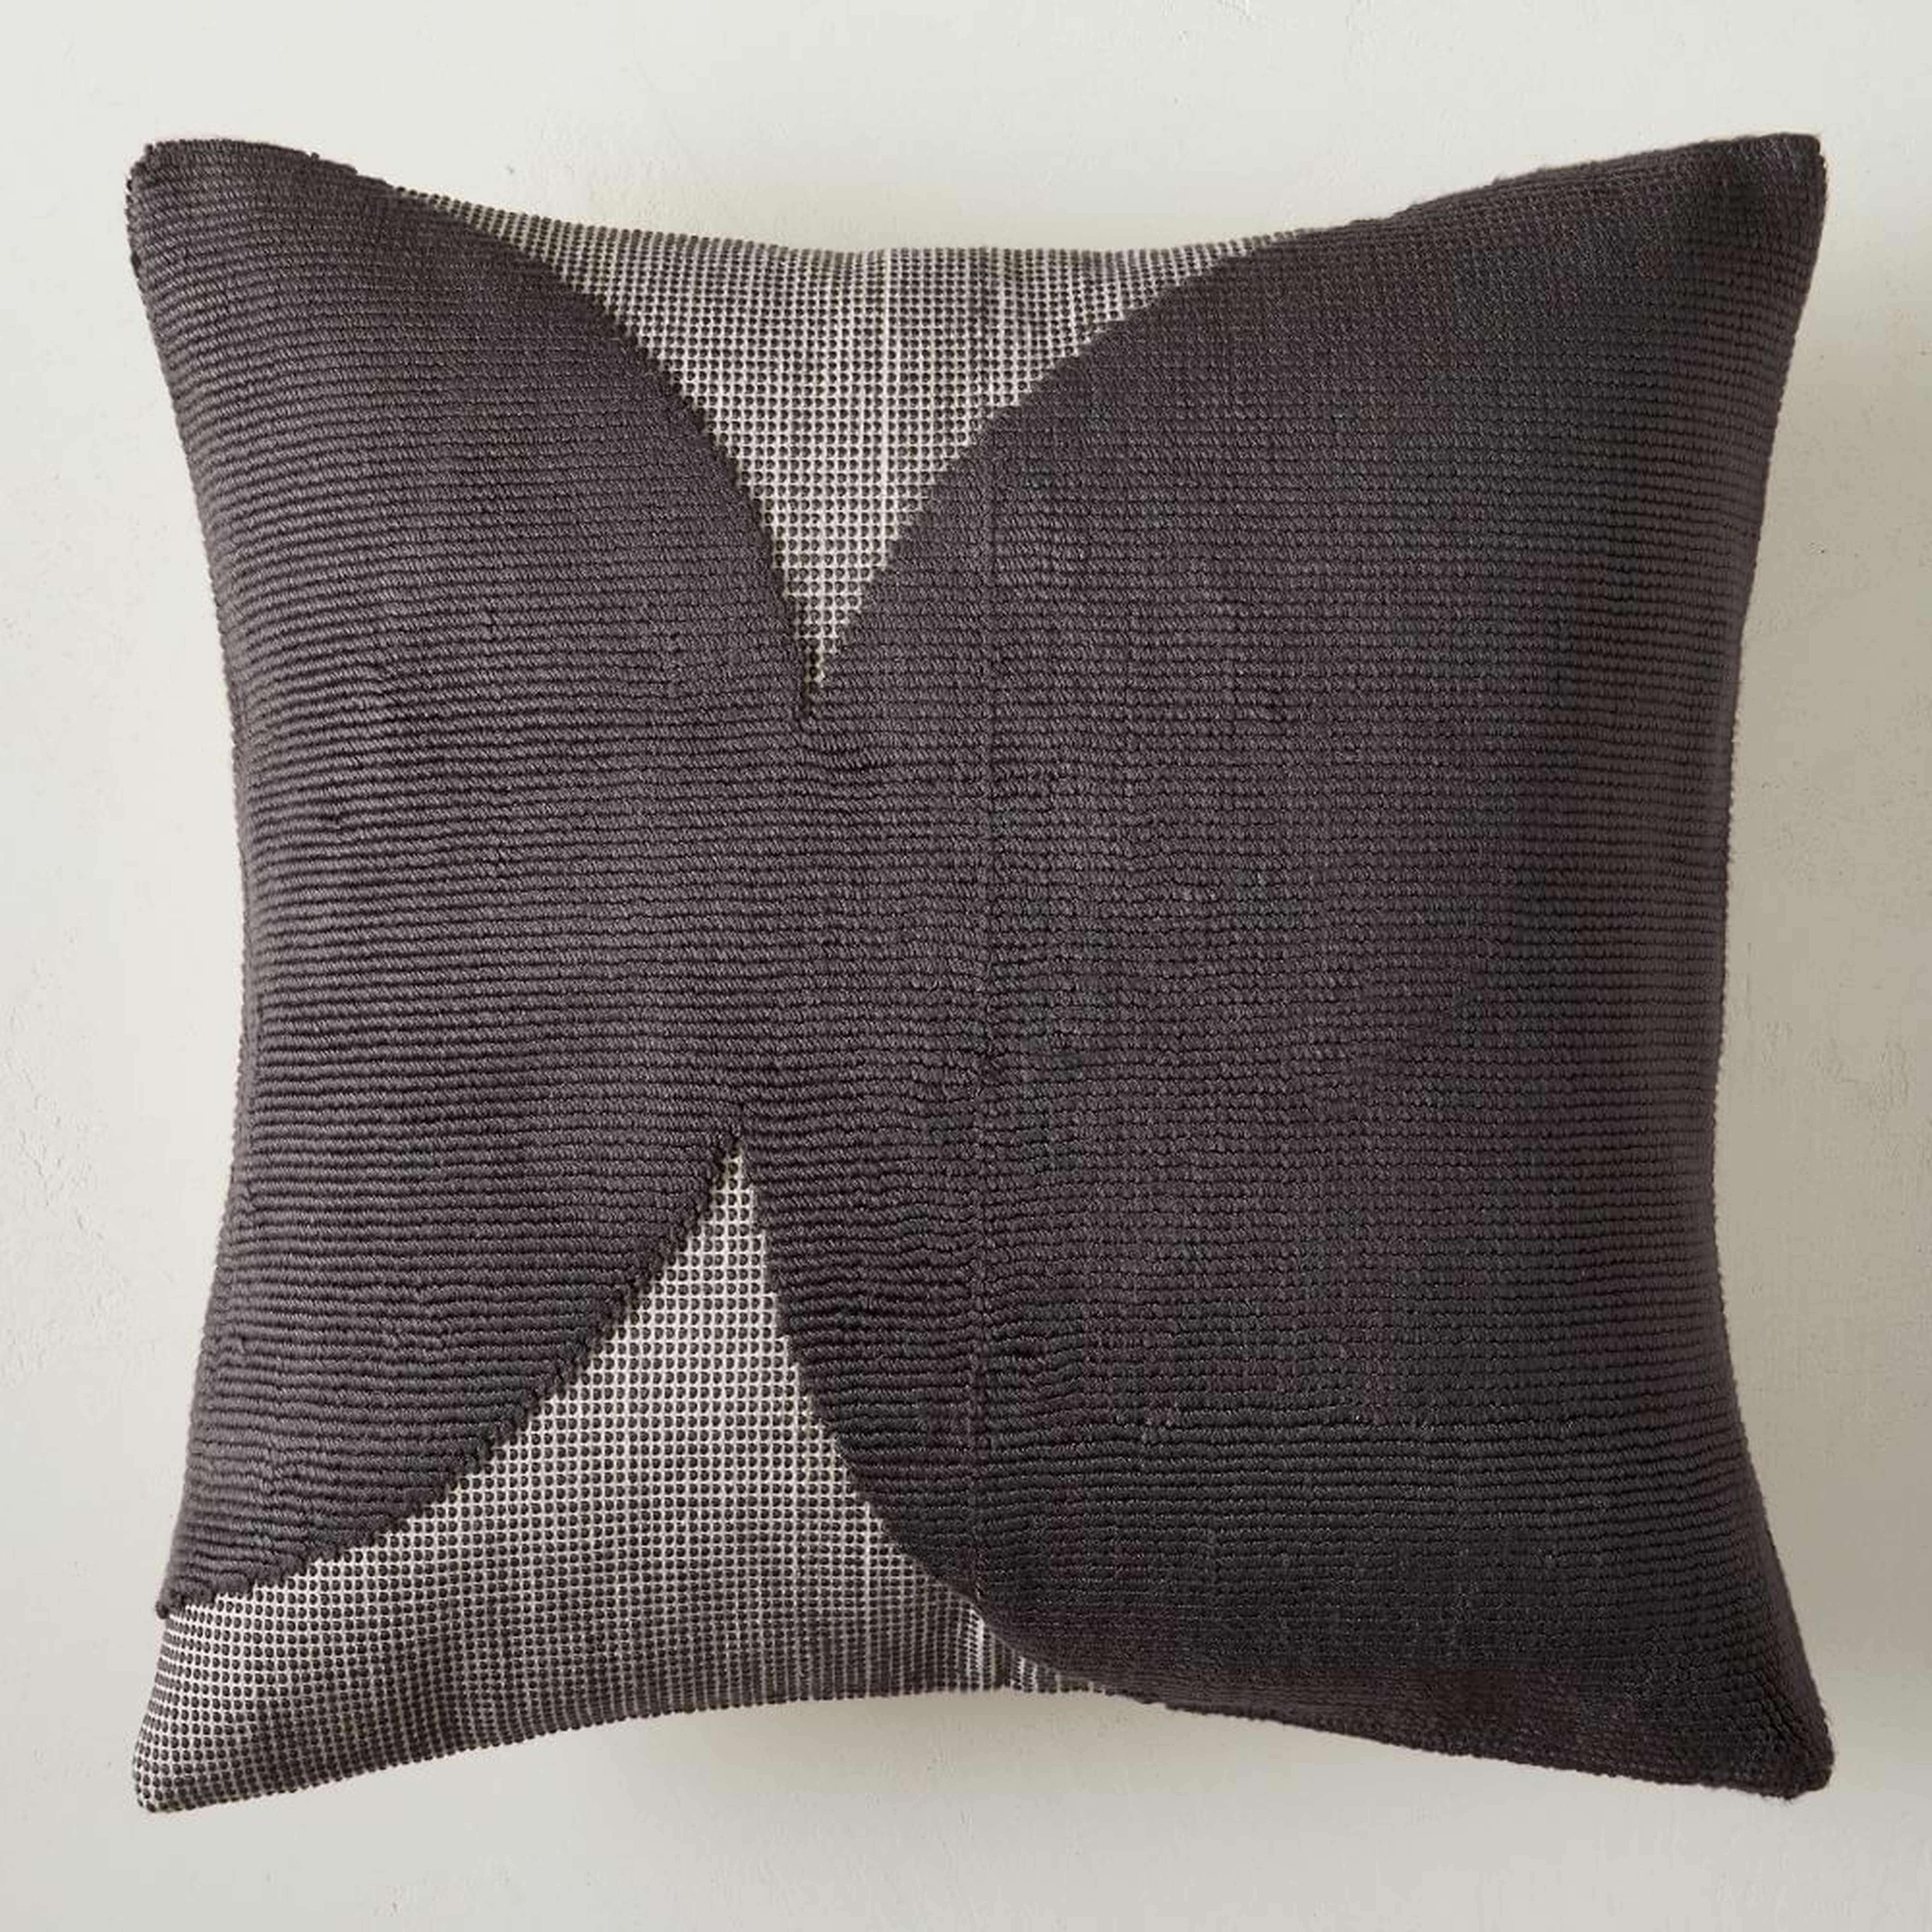 Loomed Loops Pillow Cover, 20"x20", Slate - West Elm